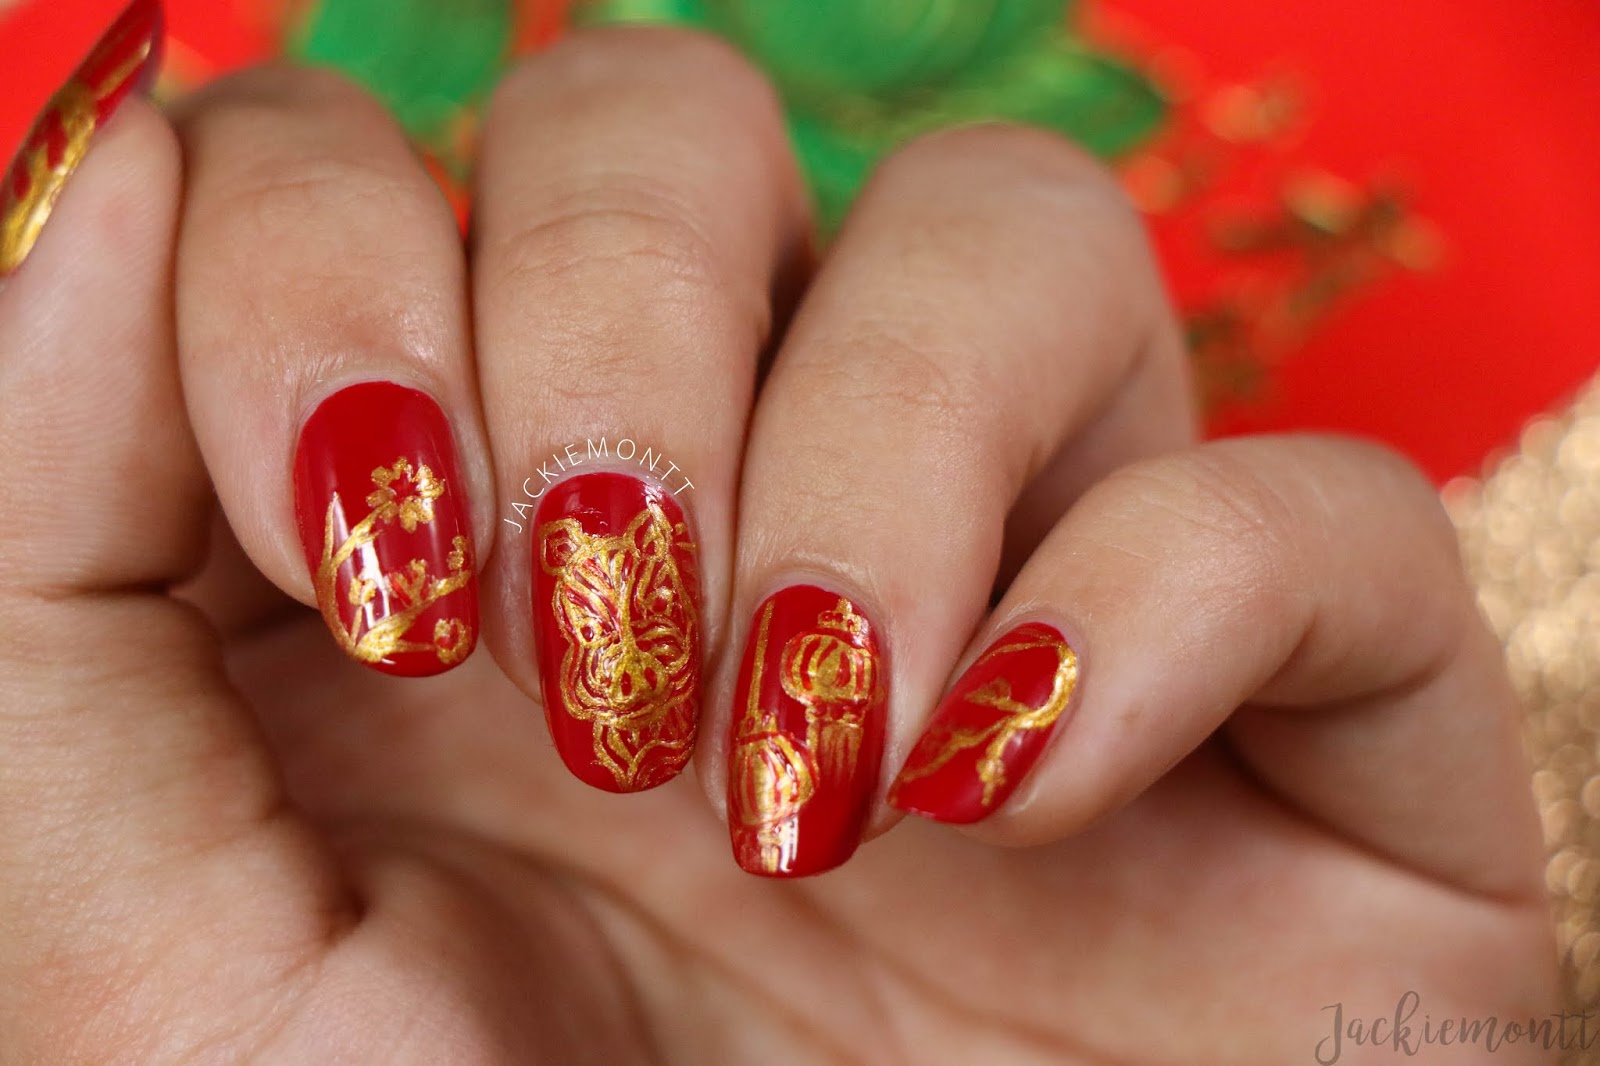 1. Babi Nail Art Designs for Chinese New Year - wide 9